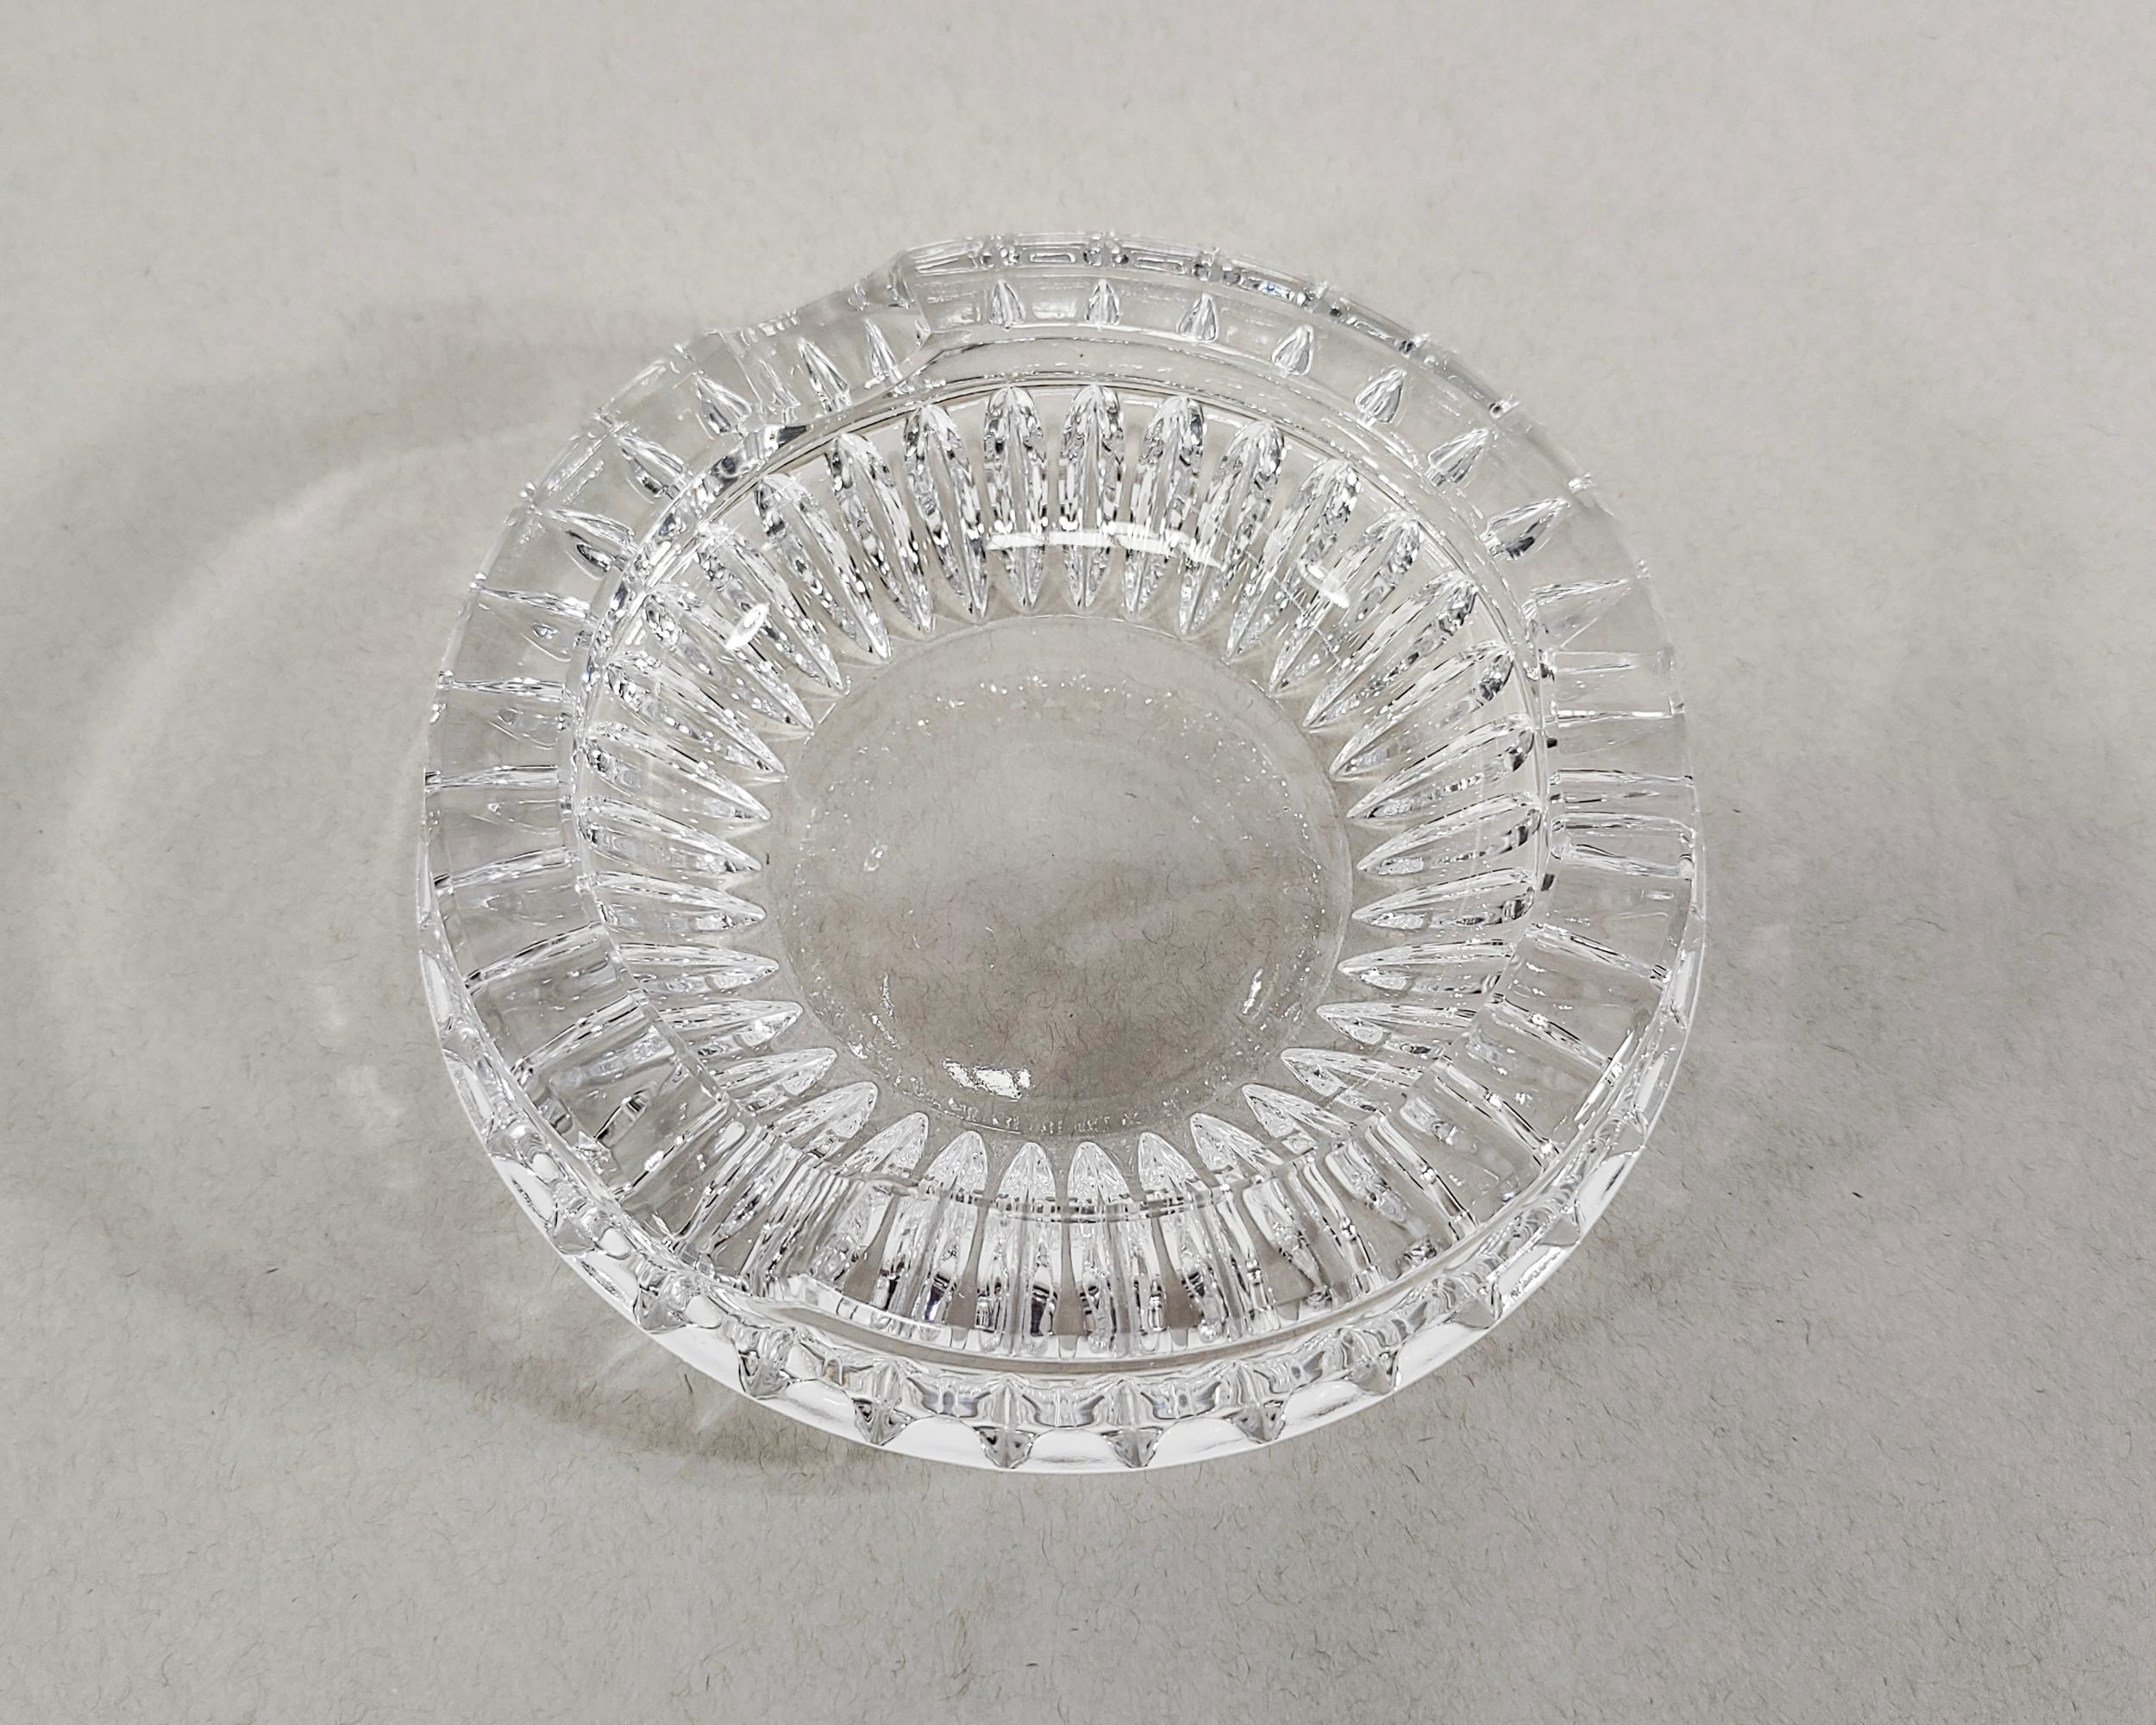 Round vintage crystal ashtray with beautiful faceted detail around its base. Overall great condition, tiny chips unnoticeable to the eye that can only be detected by touch. 

5.25